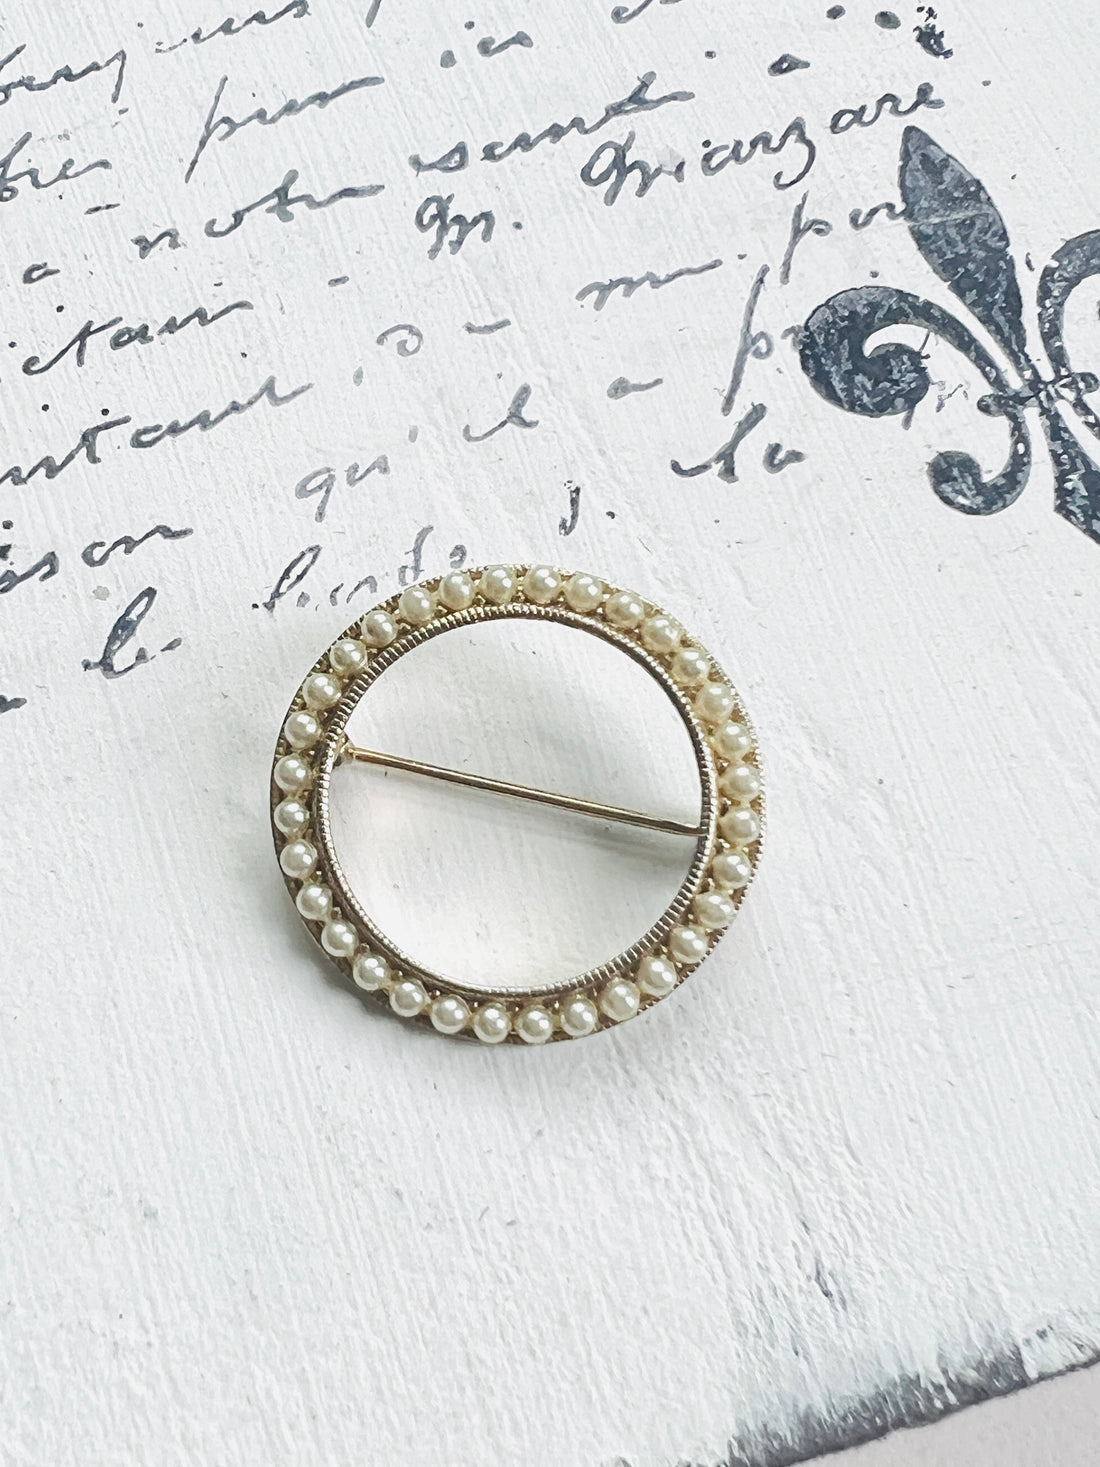 Round Pearl Brooch